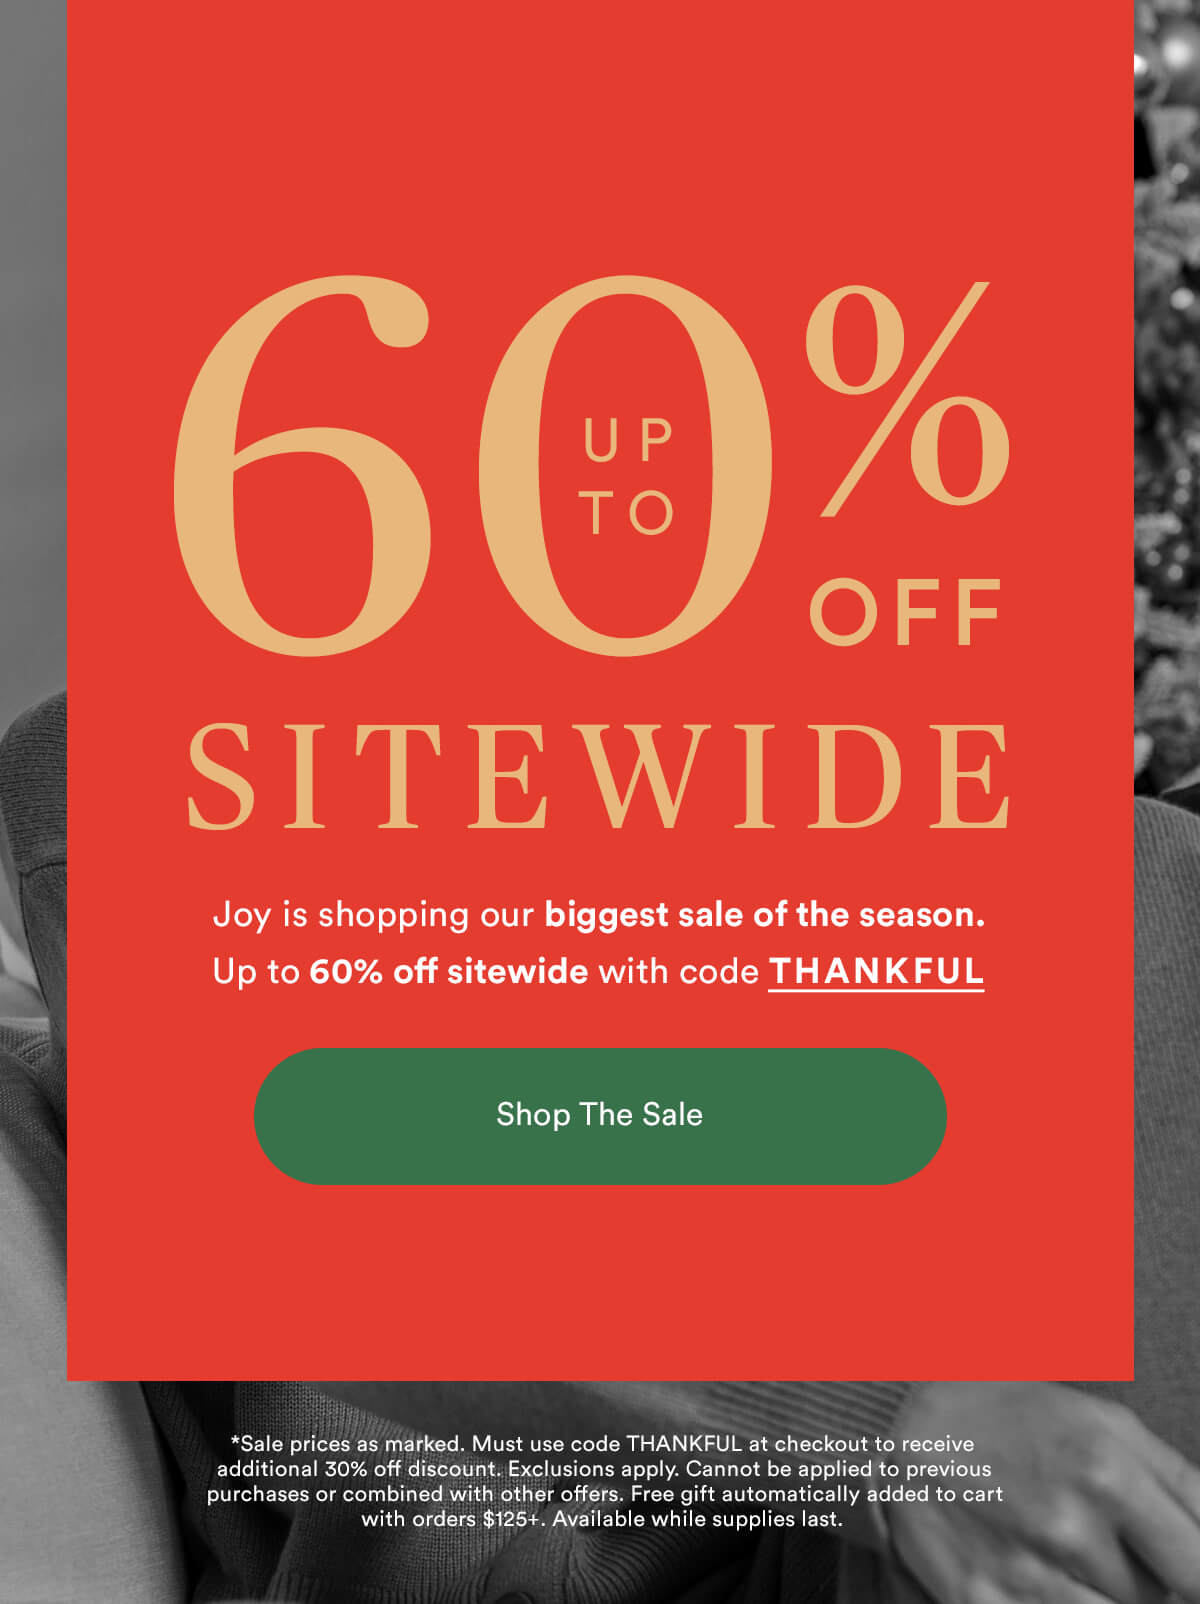 Red block over a black and white image with copy: Up to 60% off sitewide with code Thankful. Shop the Sale.